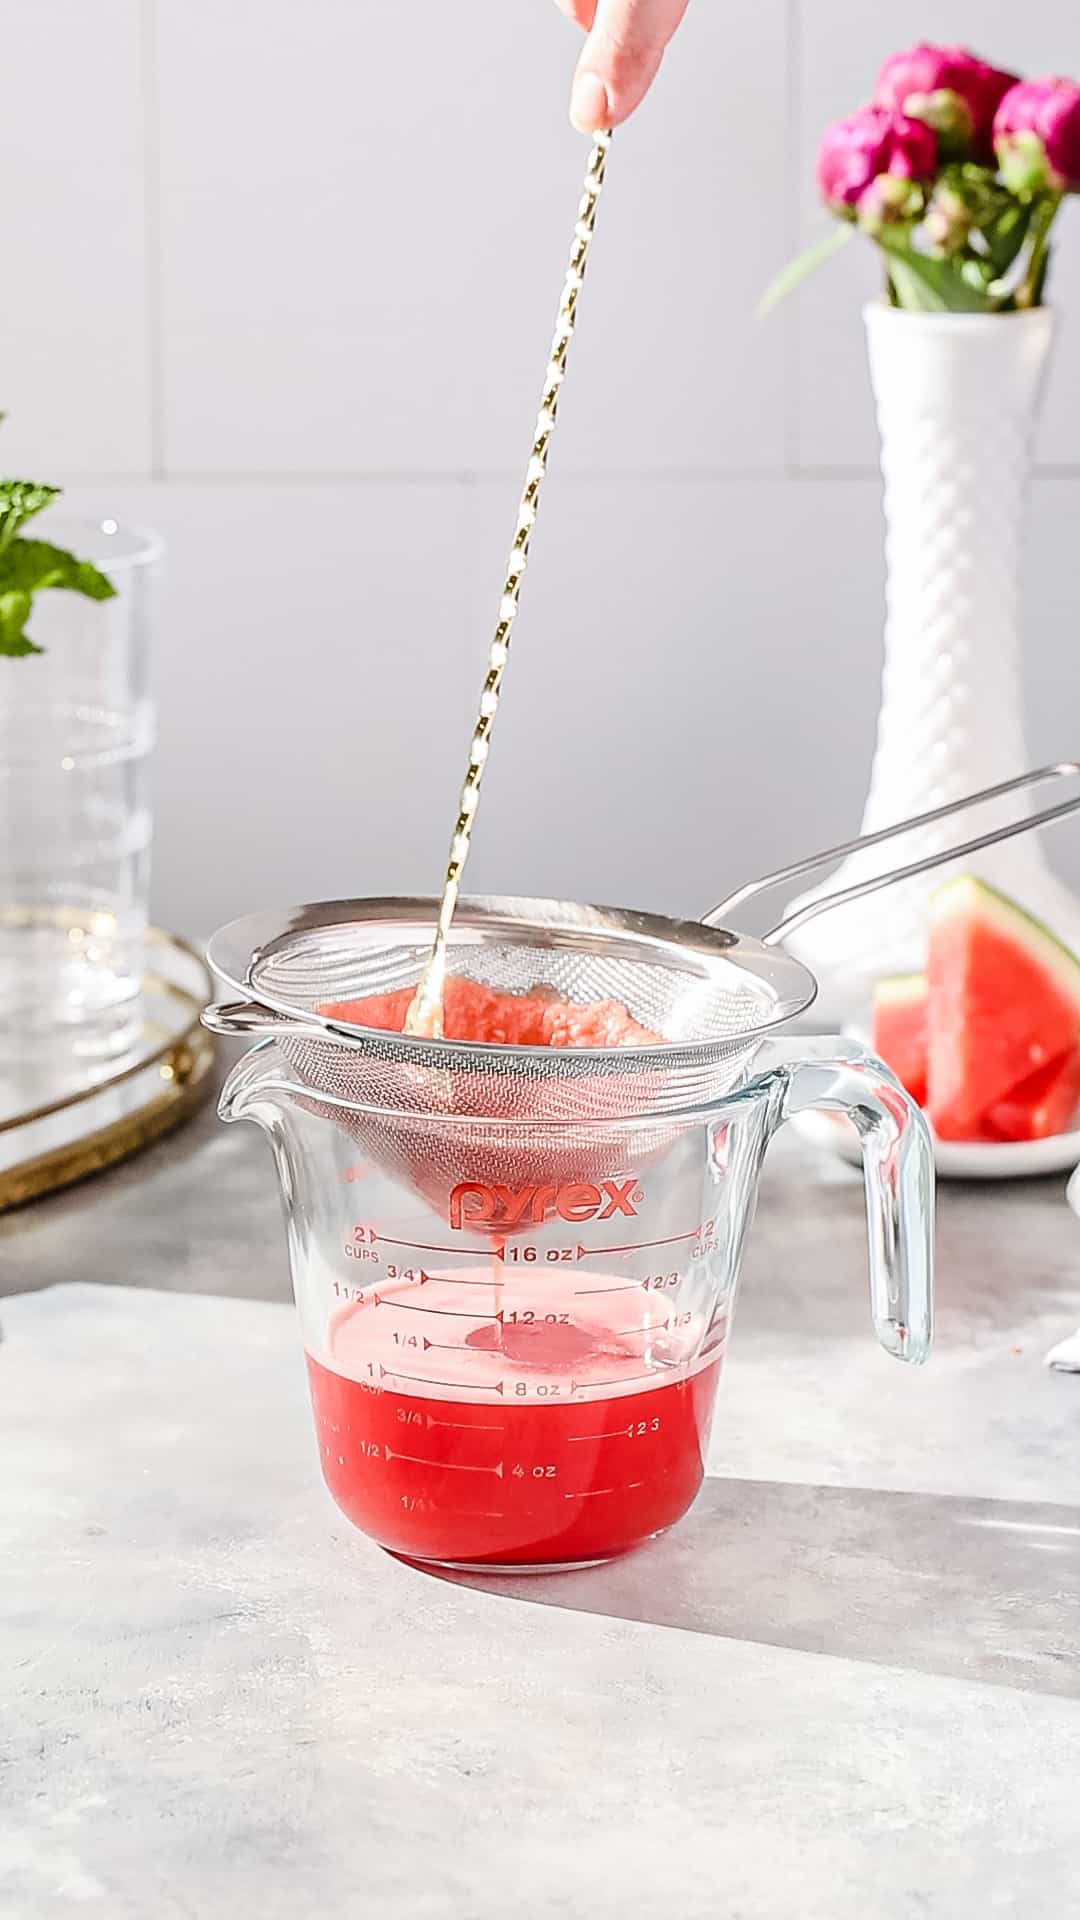 Stirring watermelon puree in a fine mesh strainer using a long bar spoon while the juice drains into a container.